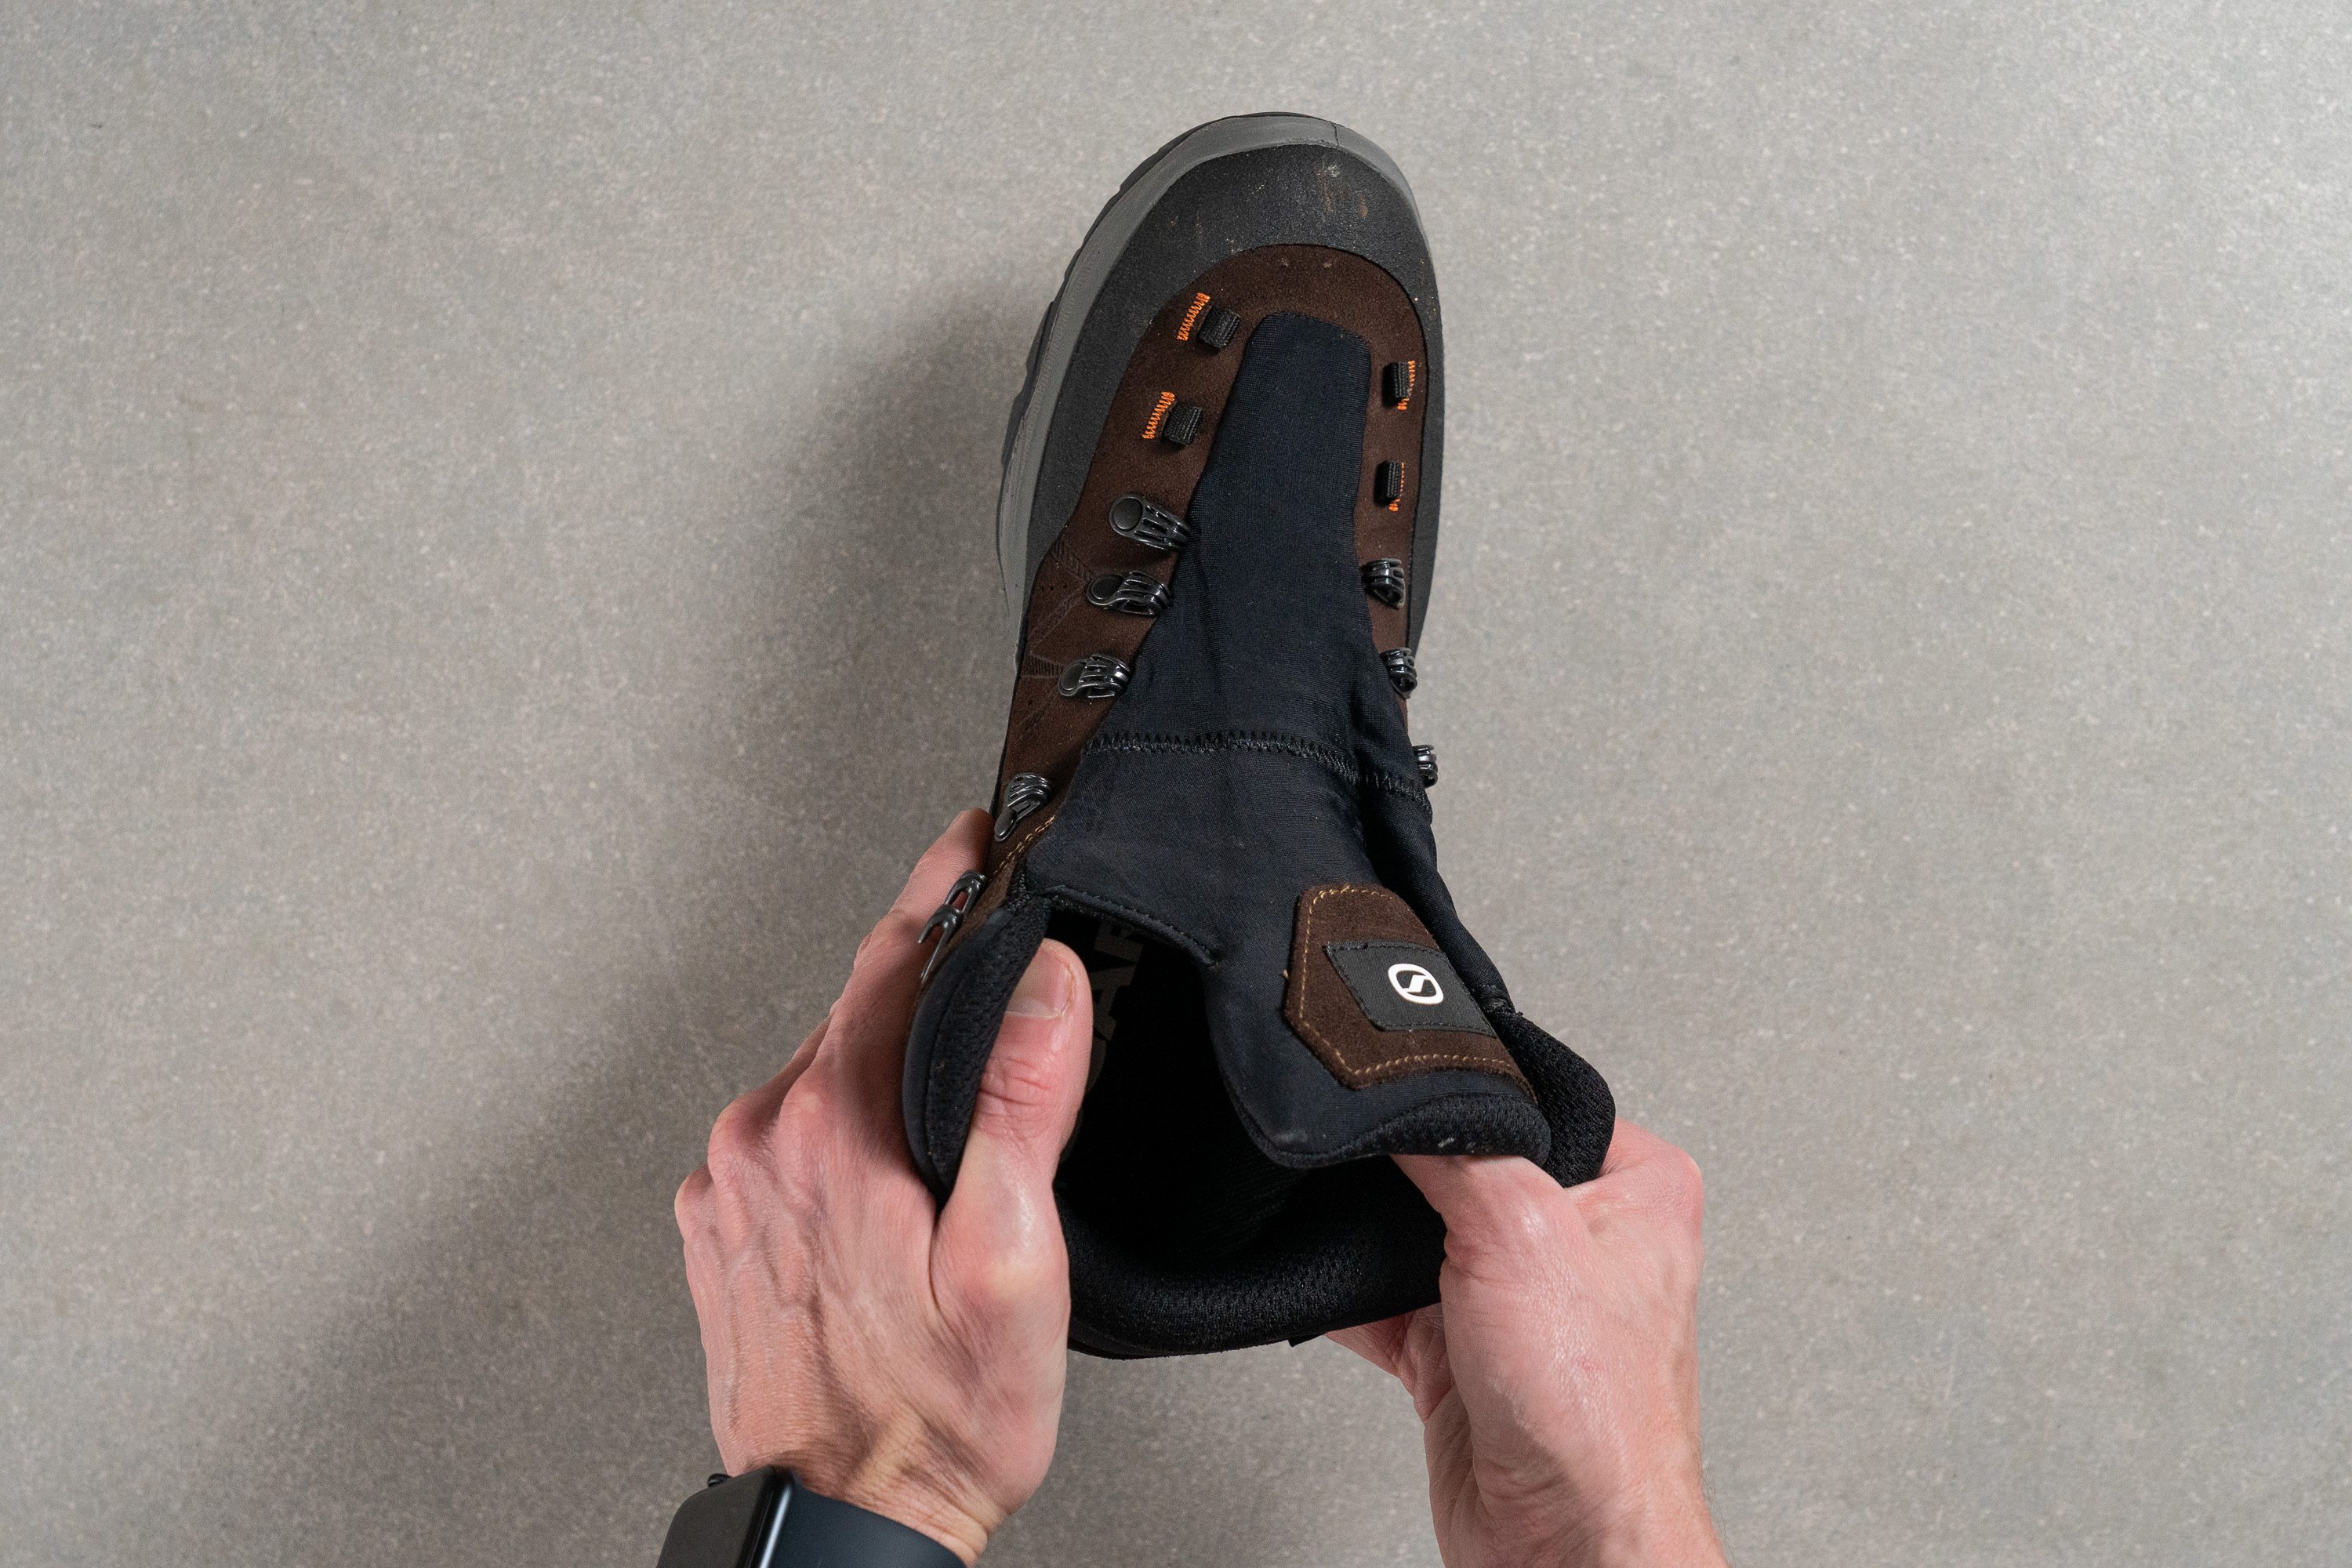 We recommend the Boreas GTX as an excellent choice for Tongue: gusset type